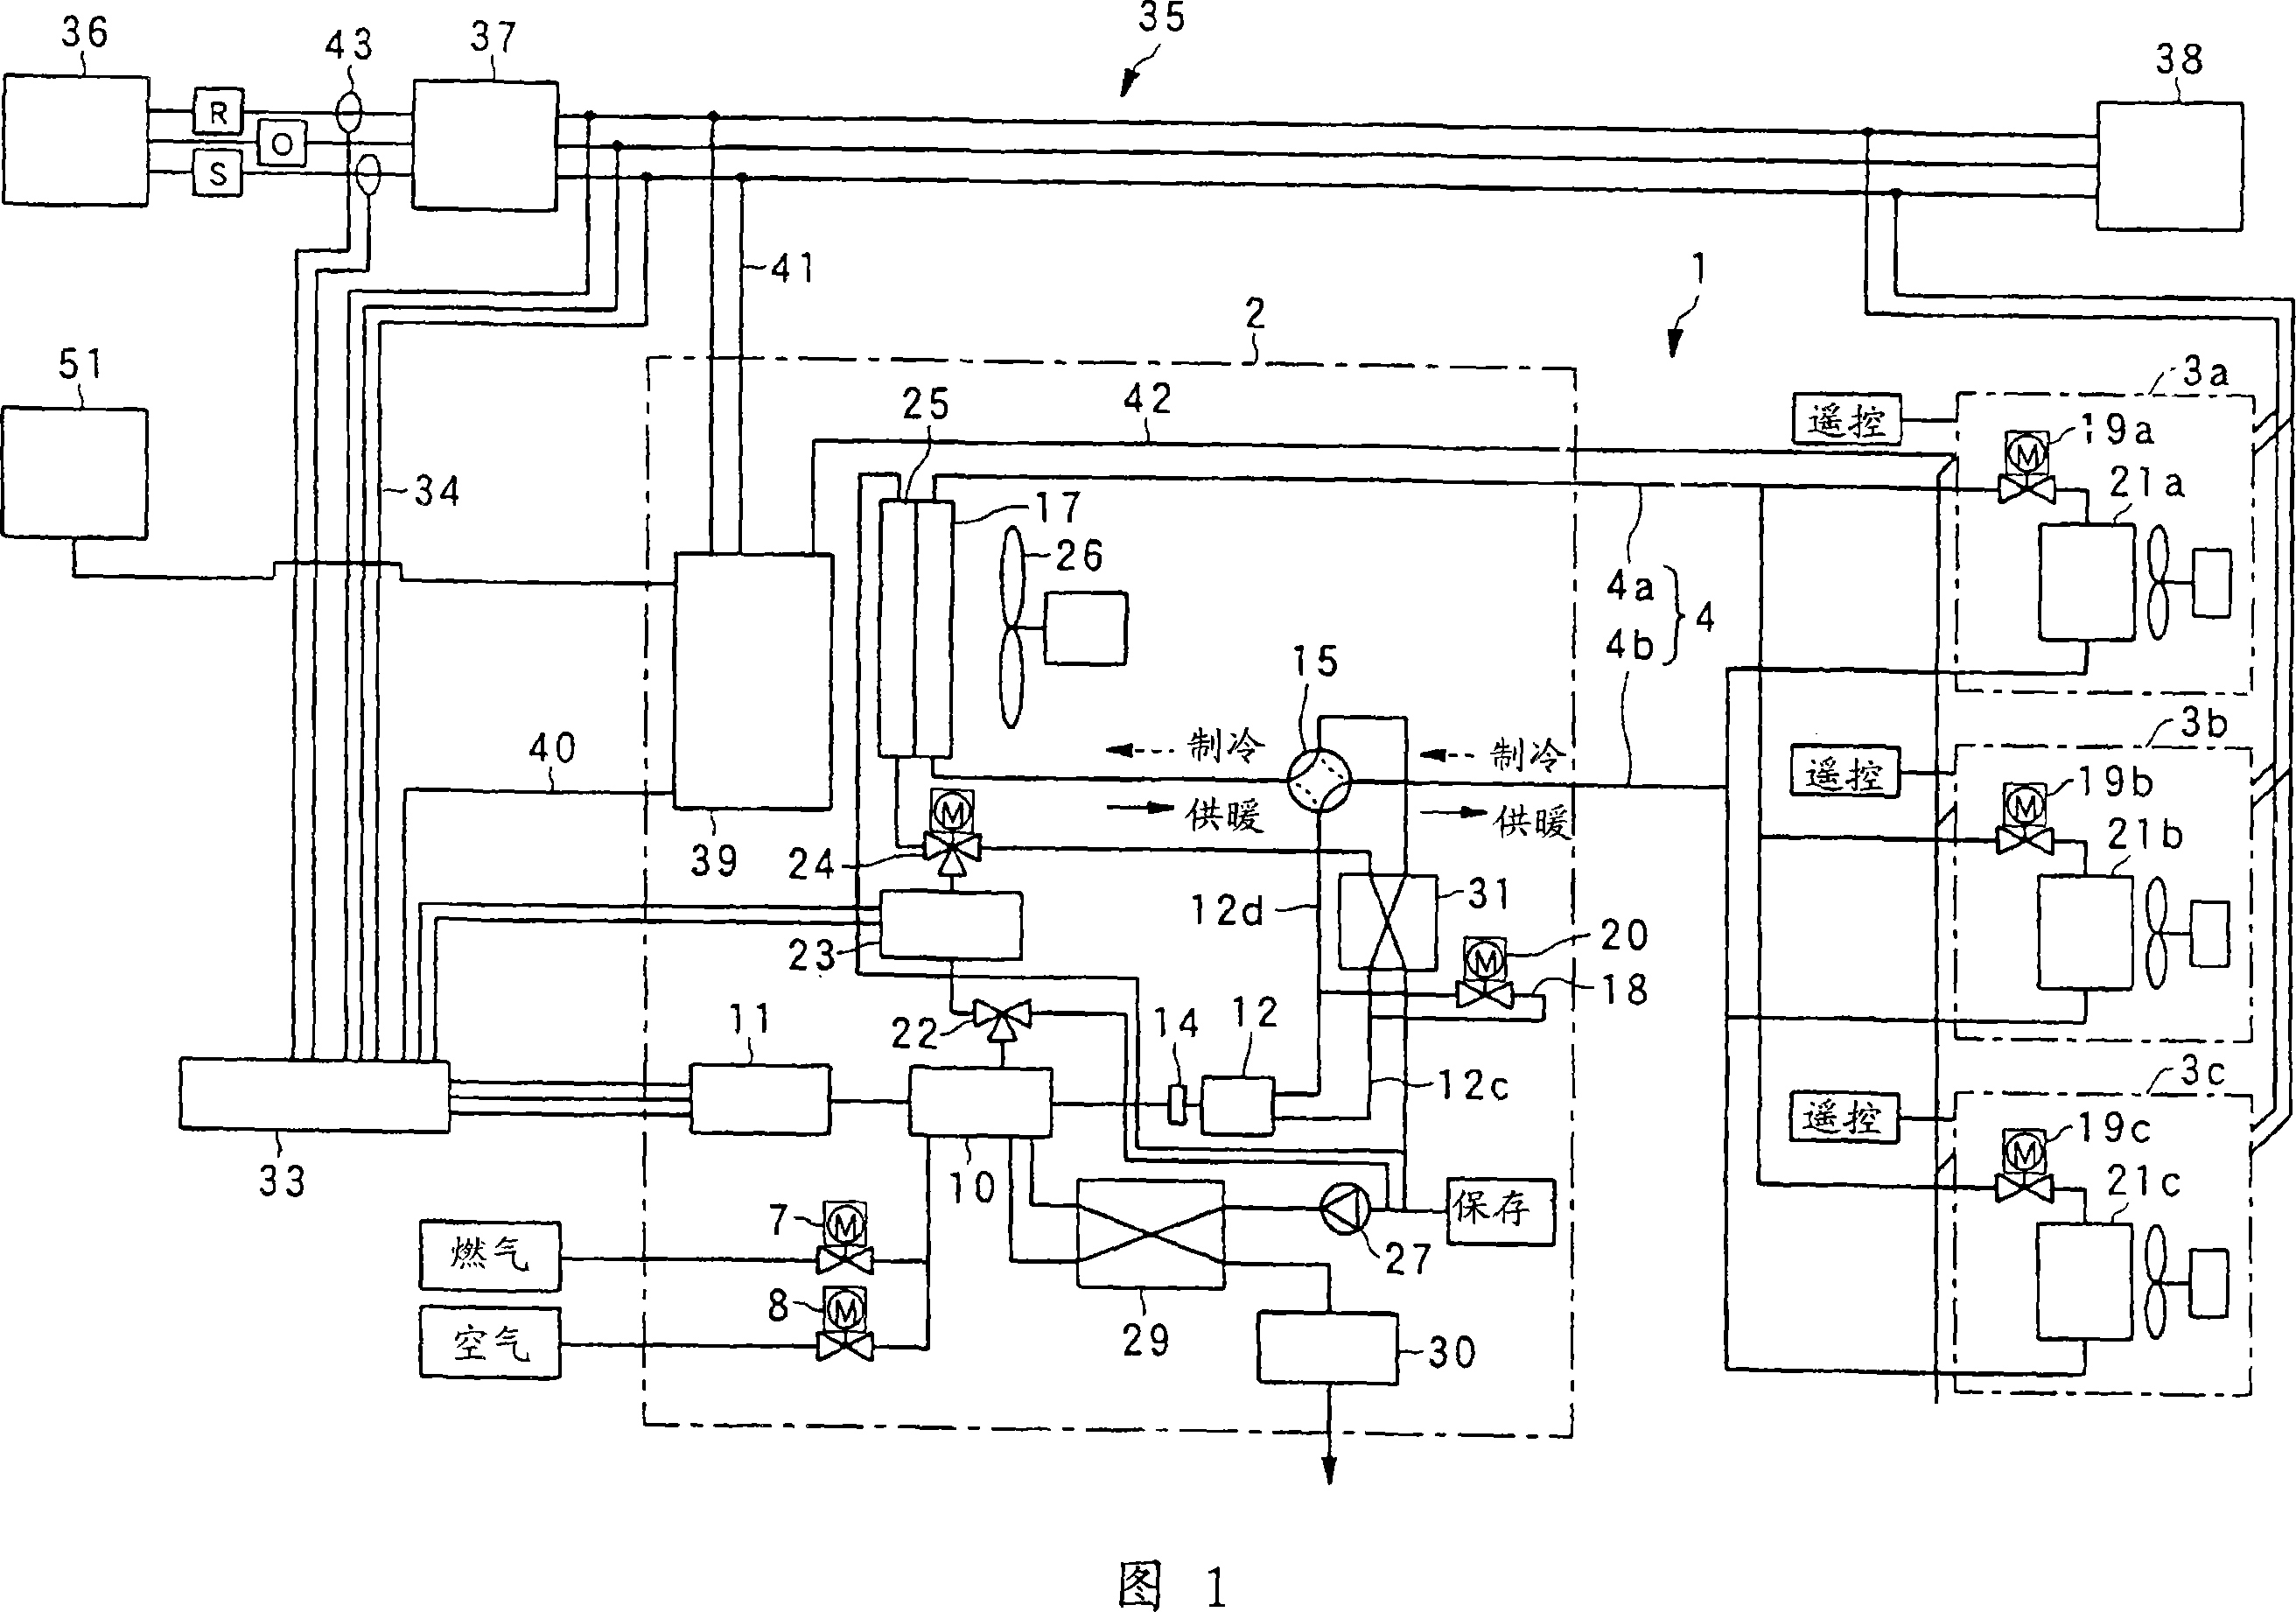 Air-conditioning and electric power generating system and control method for the same